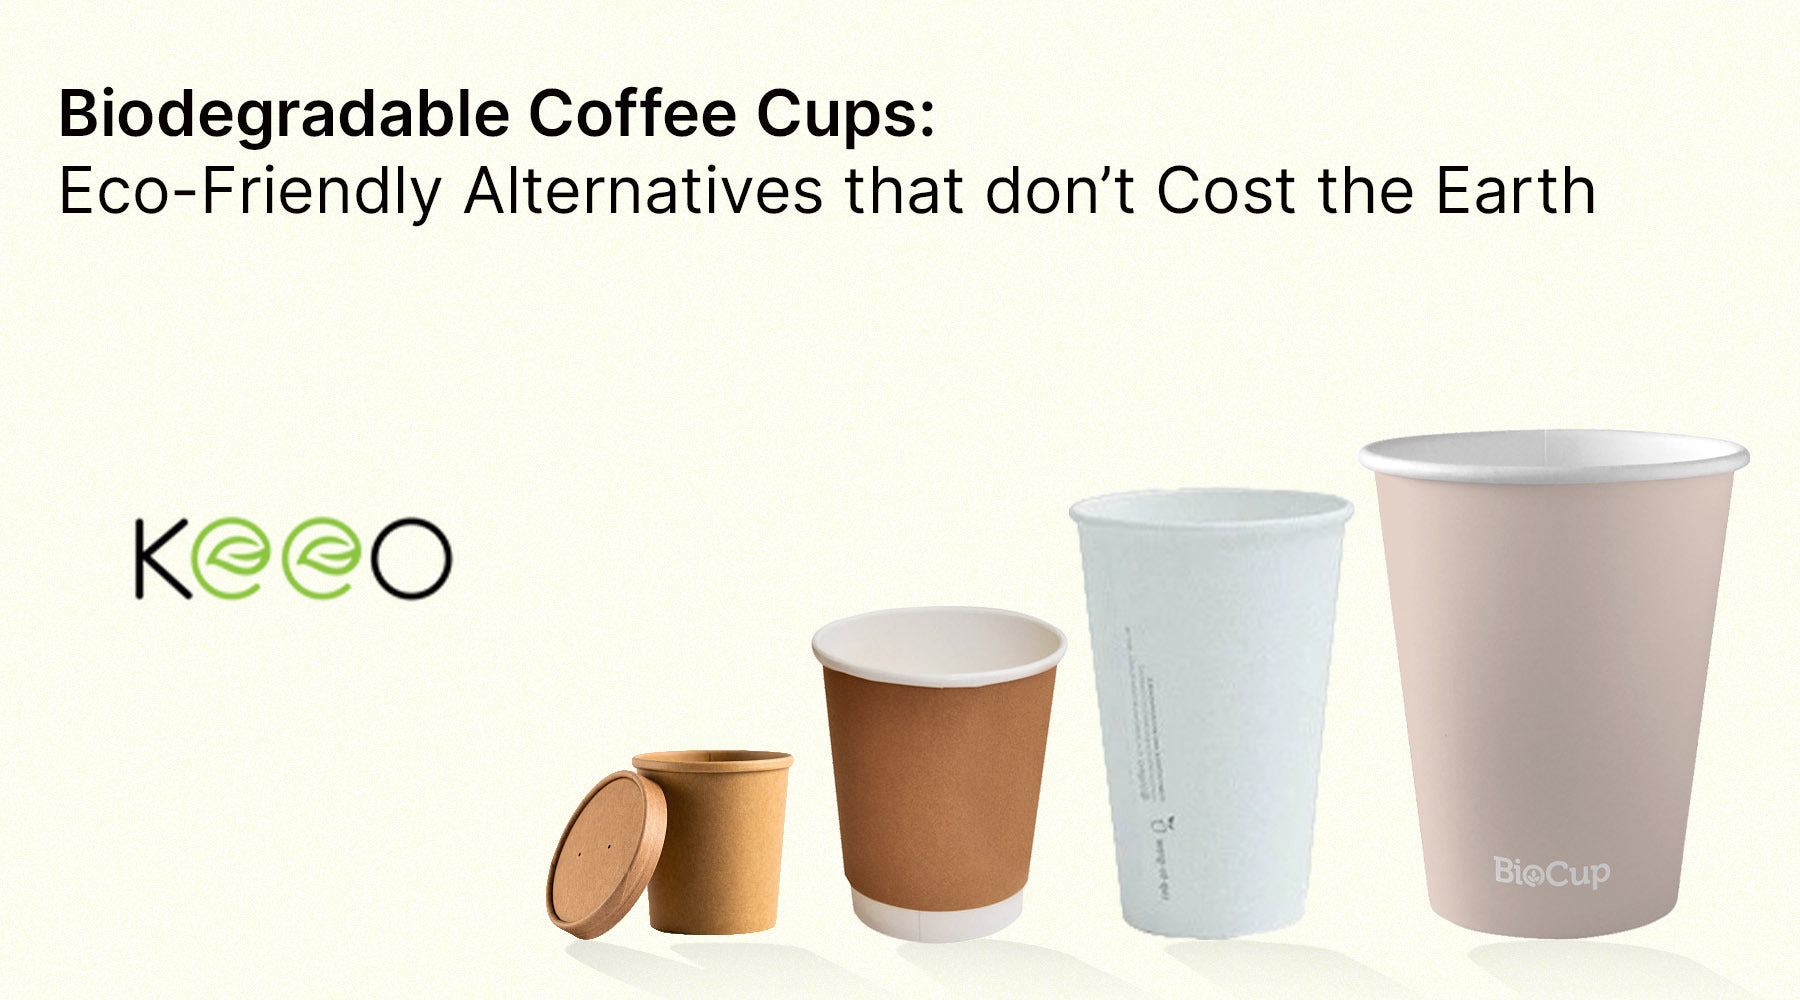 Why Are Paper Coffee Cups Bad for the Environment?